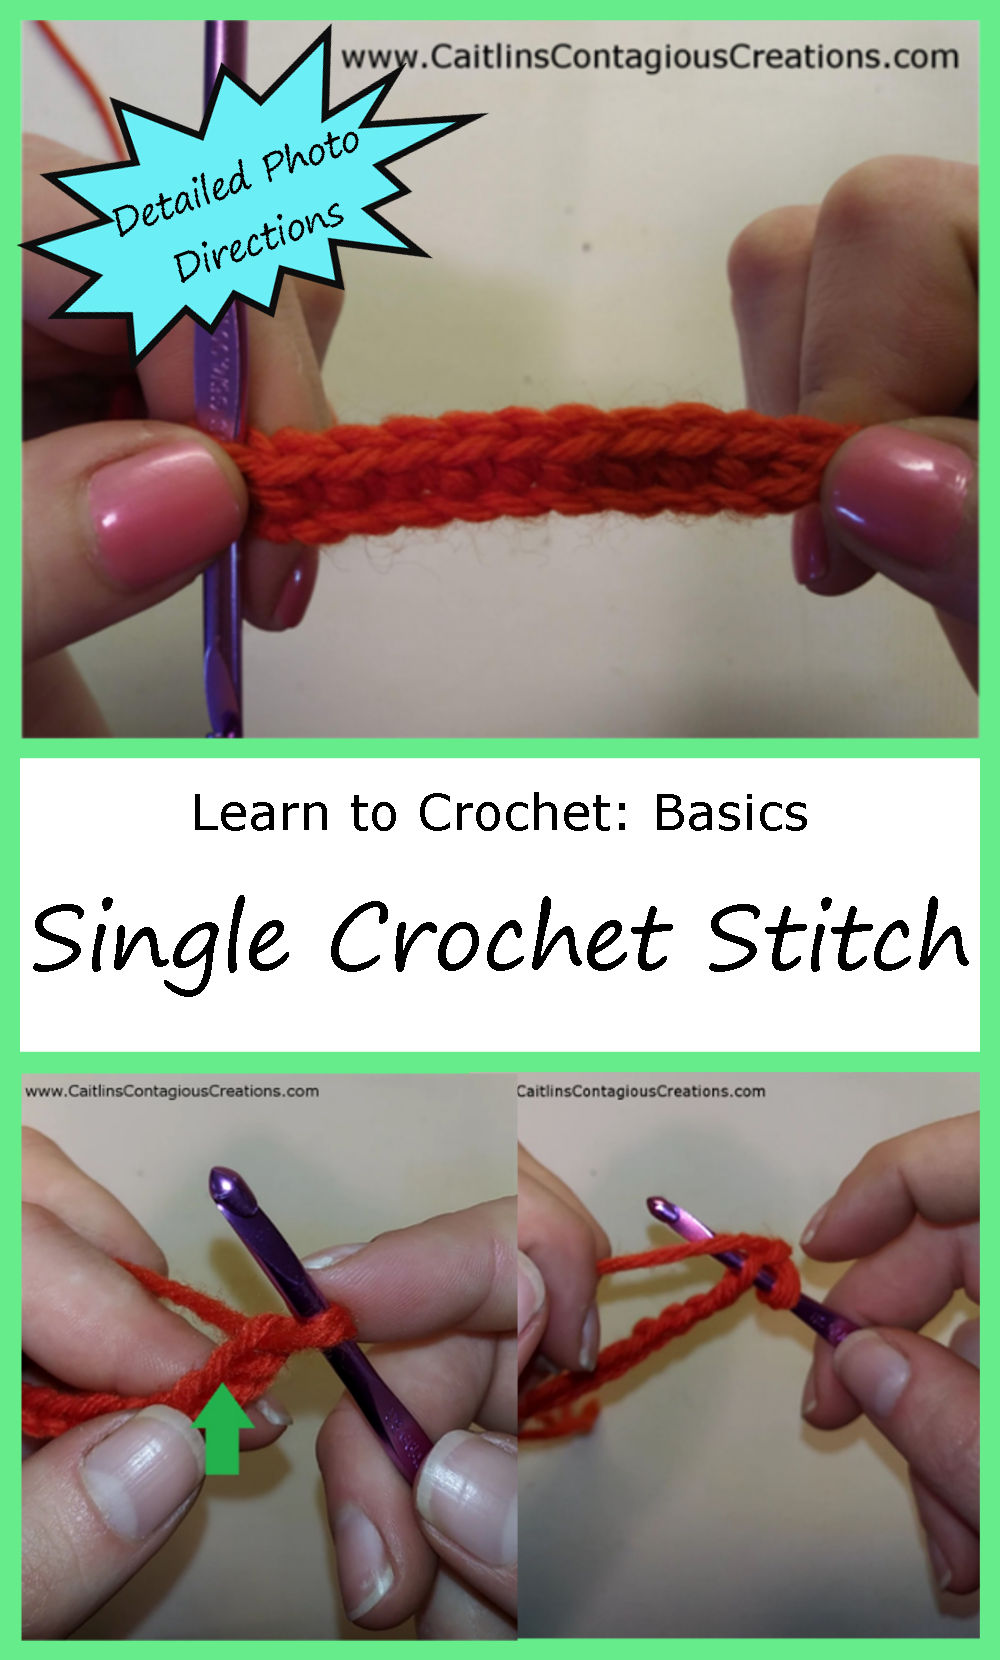 Learn to Crochet the Single Crochet Stitch, a tutorial from Caitlin's Contagious Creations. This easy beginner friendly guide is a great way to learn basic skills for crochet. The photo packed step by step instruction is easy and fun to follow.